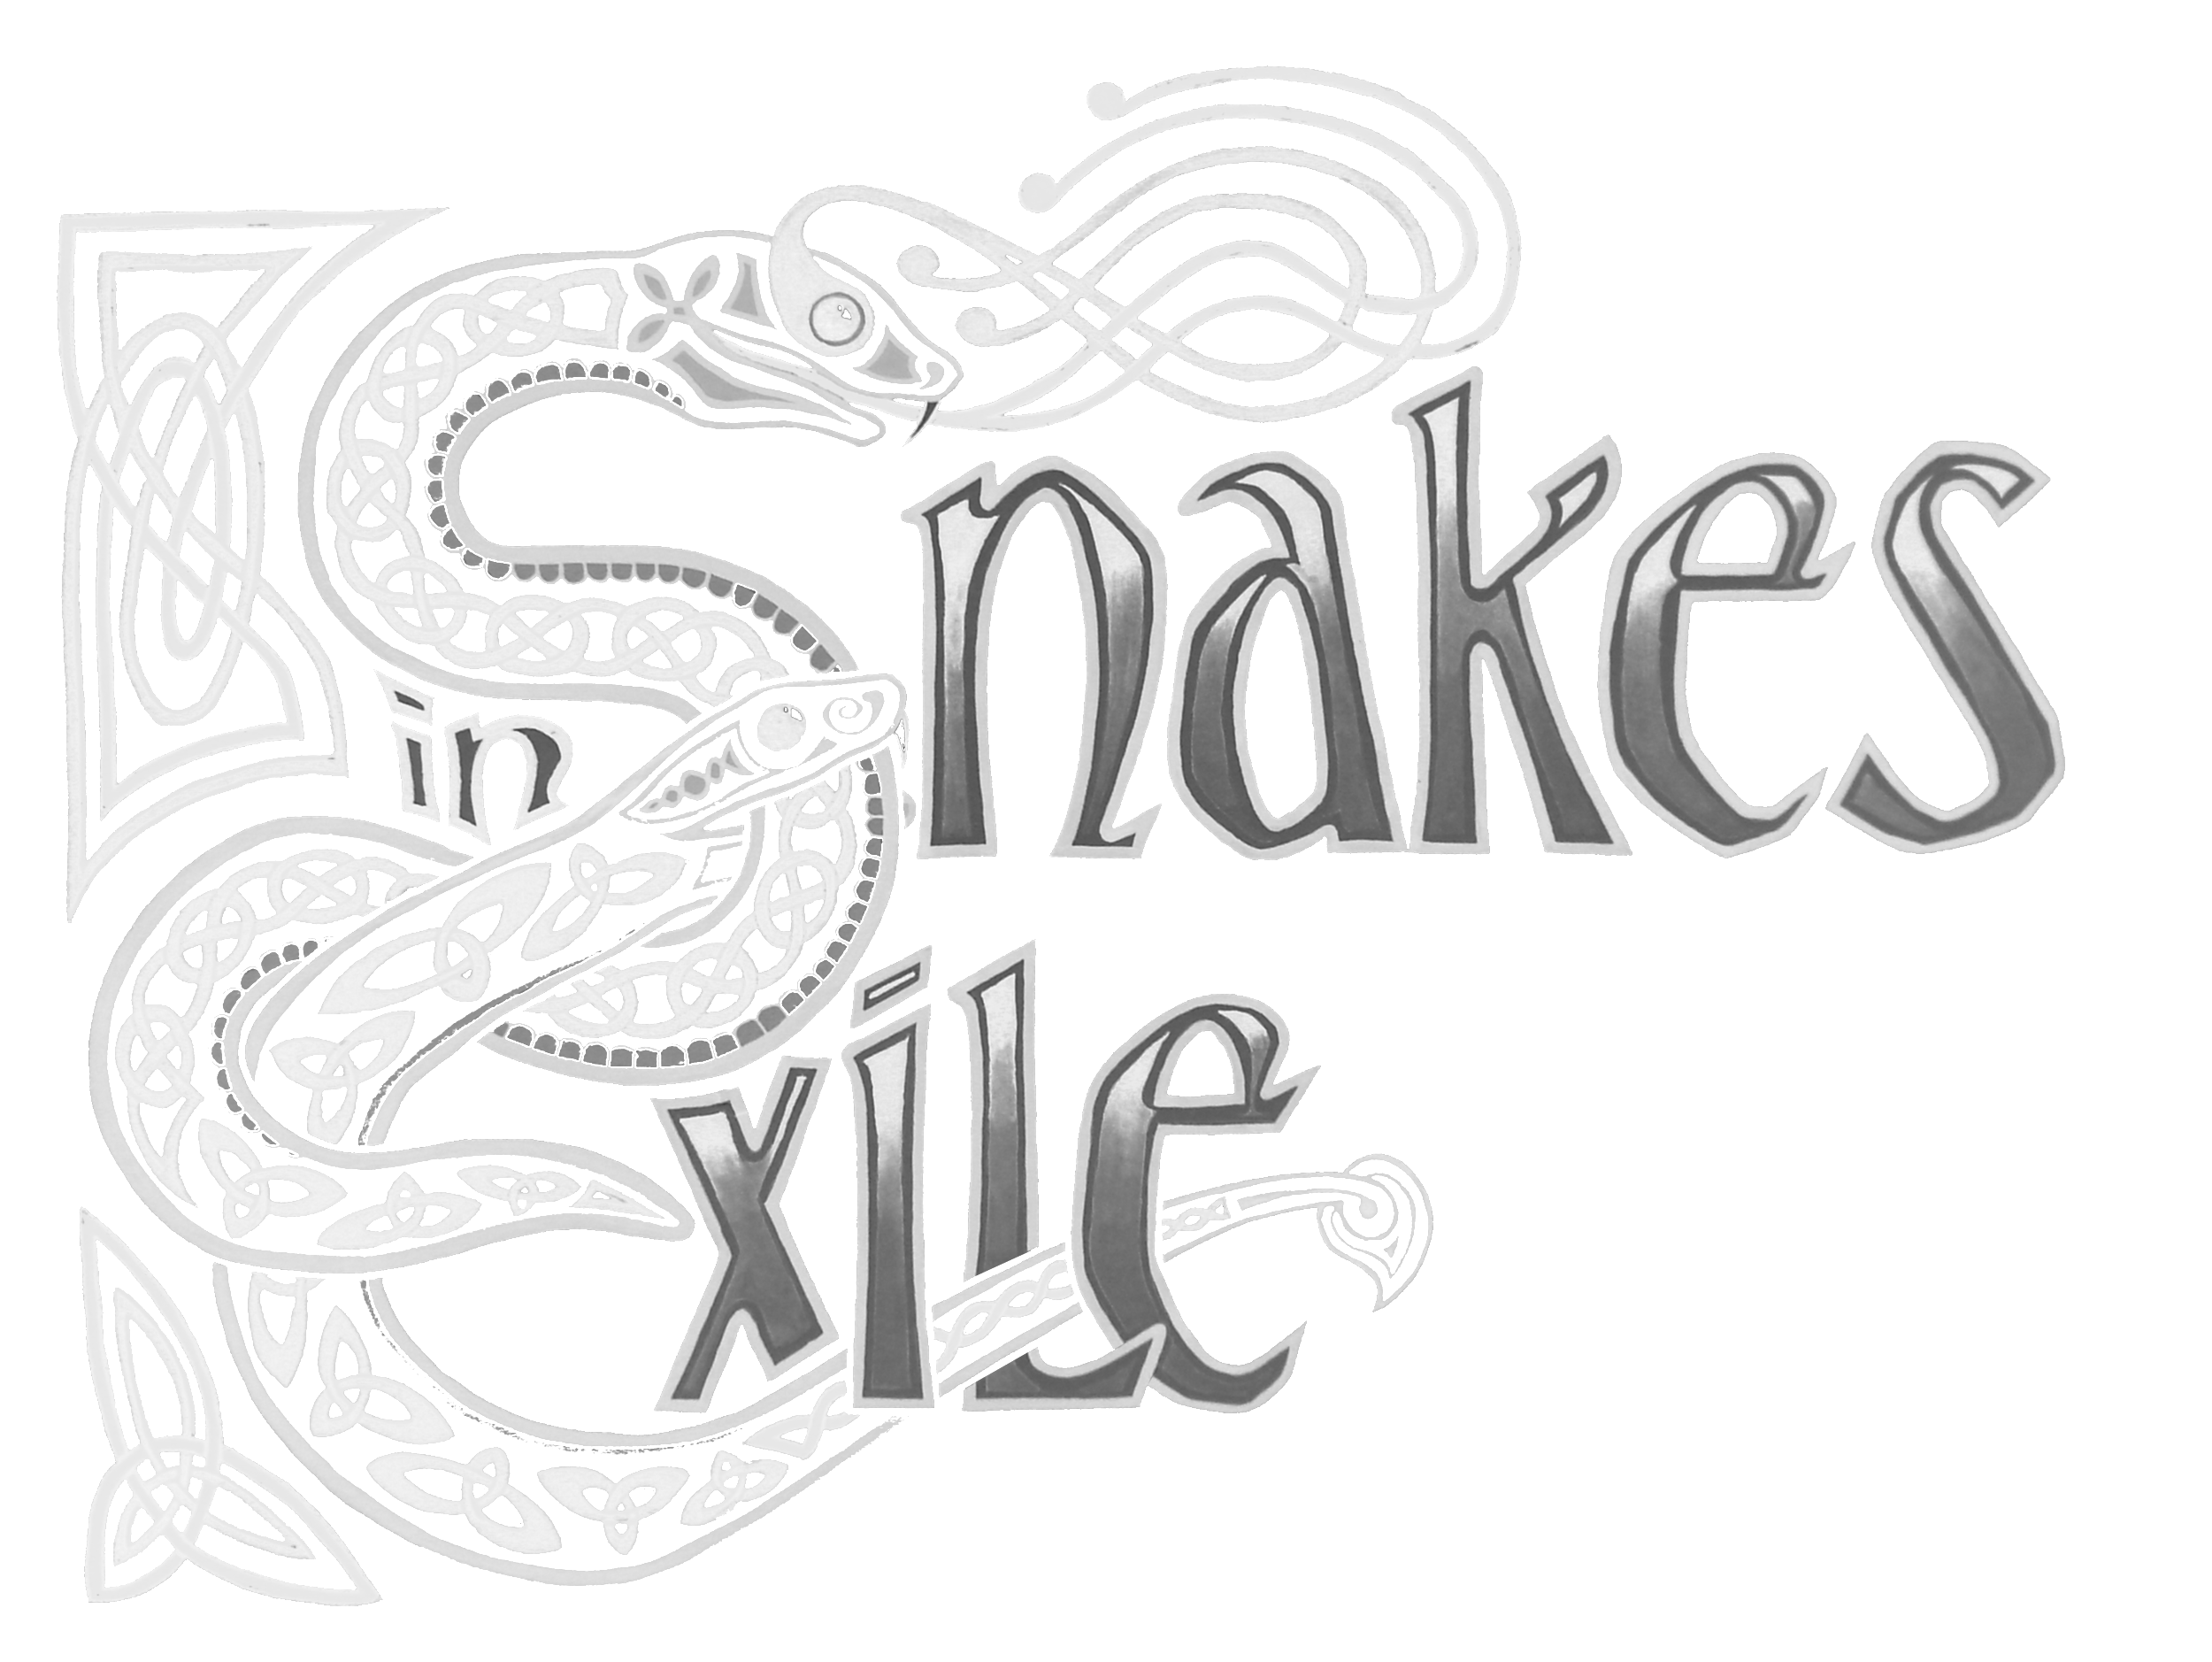 Snakes in Exile